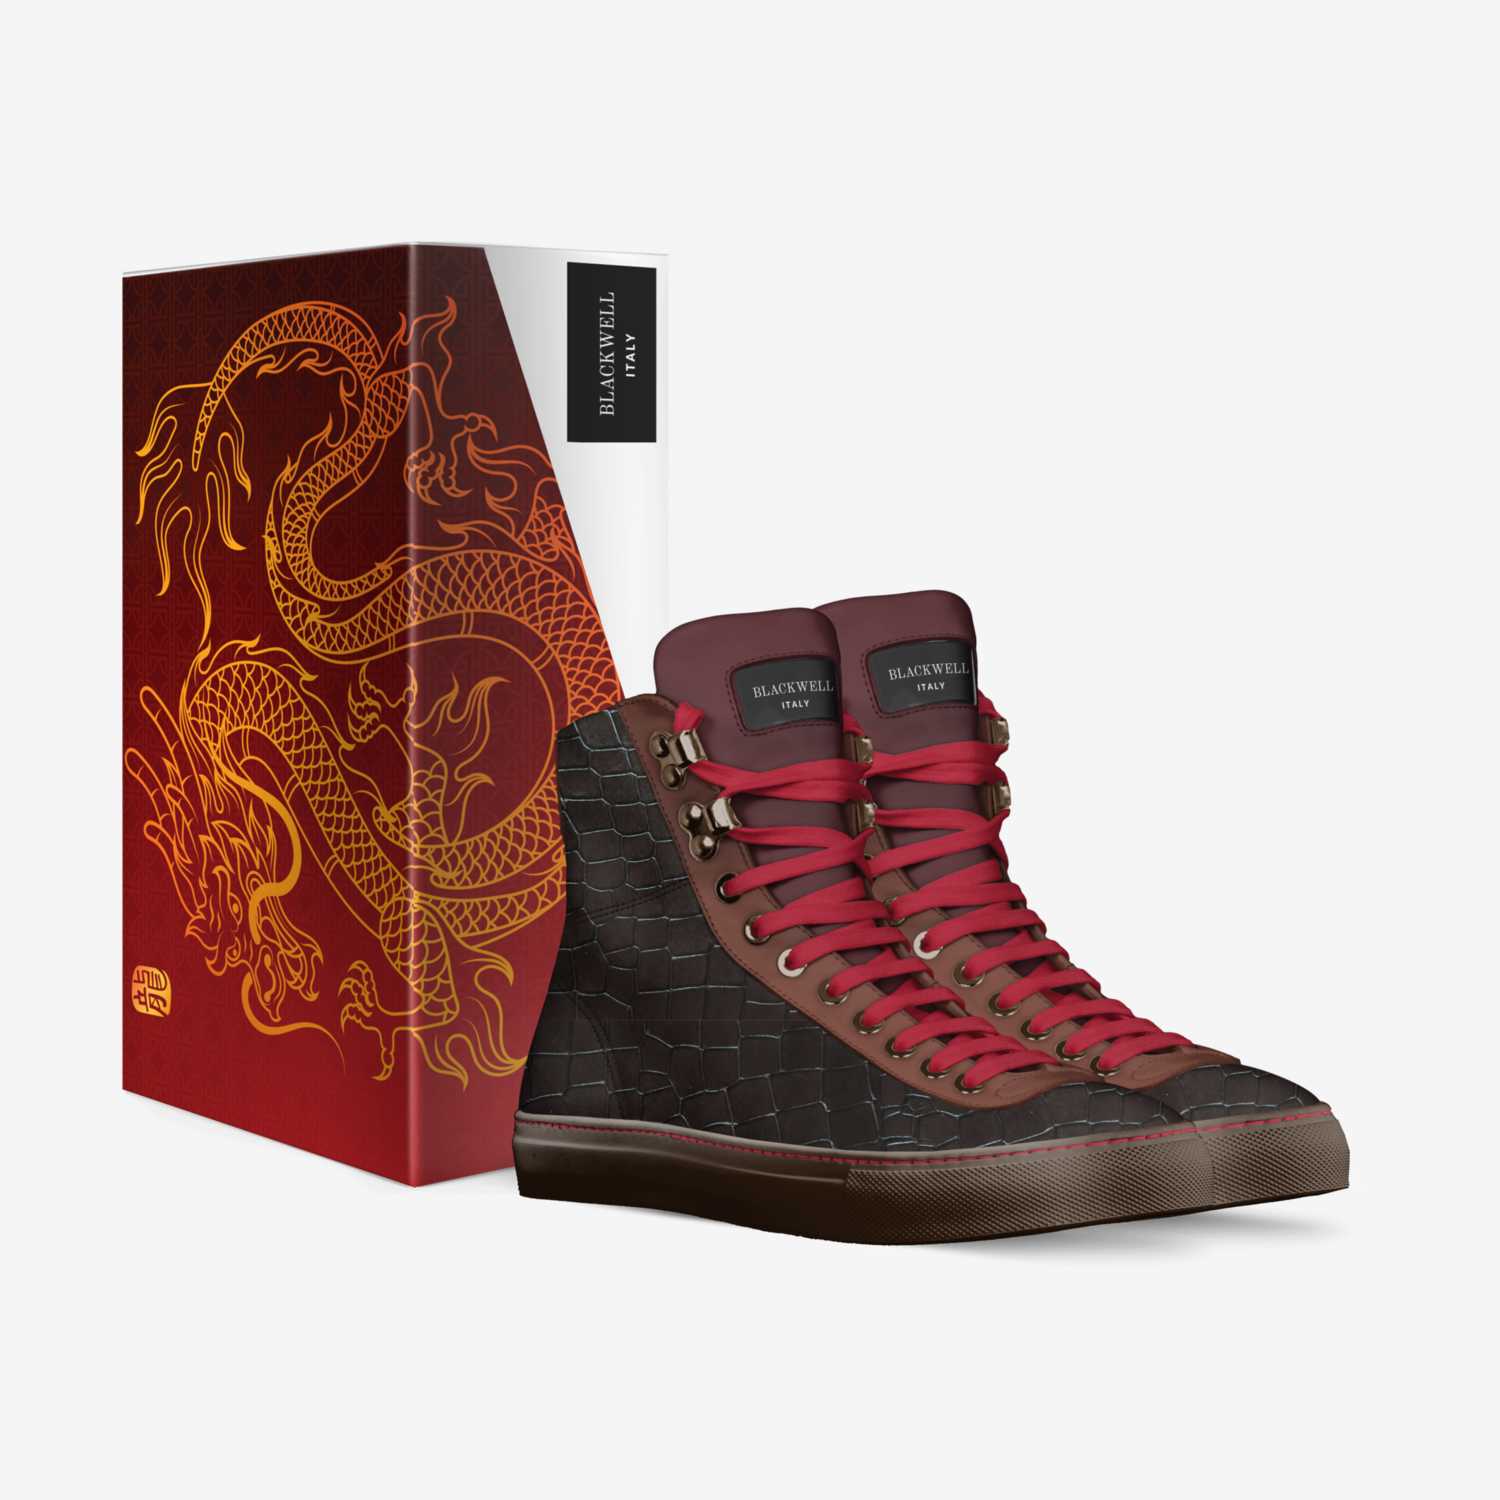 Red Dragon custom made in Italy shoes by Lawrence Blackwell | Box view